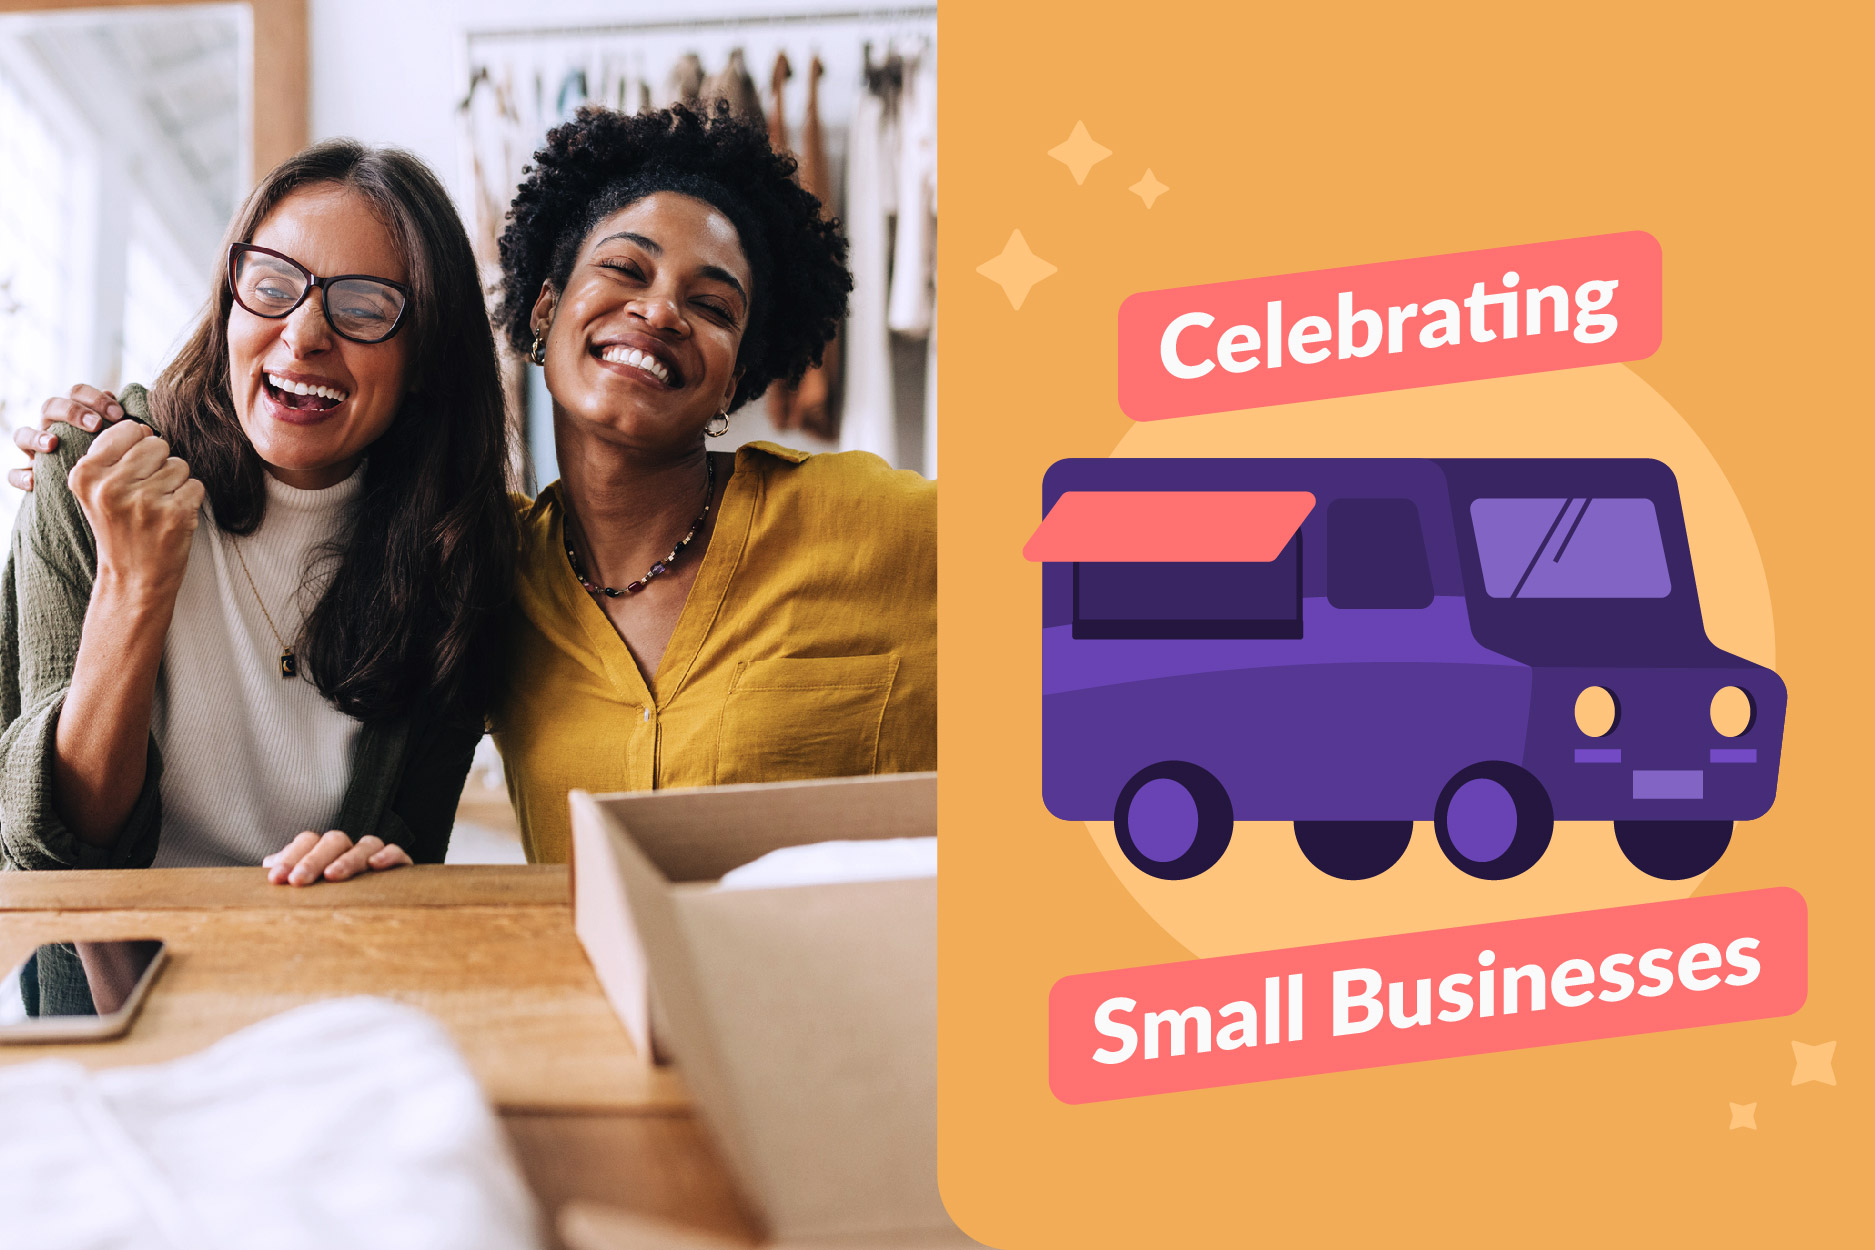 Female business owners smiling with text "celebrating small businesses"